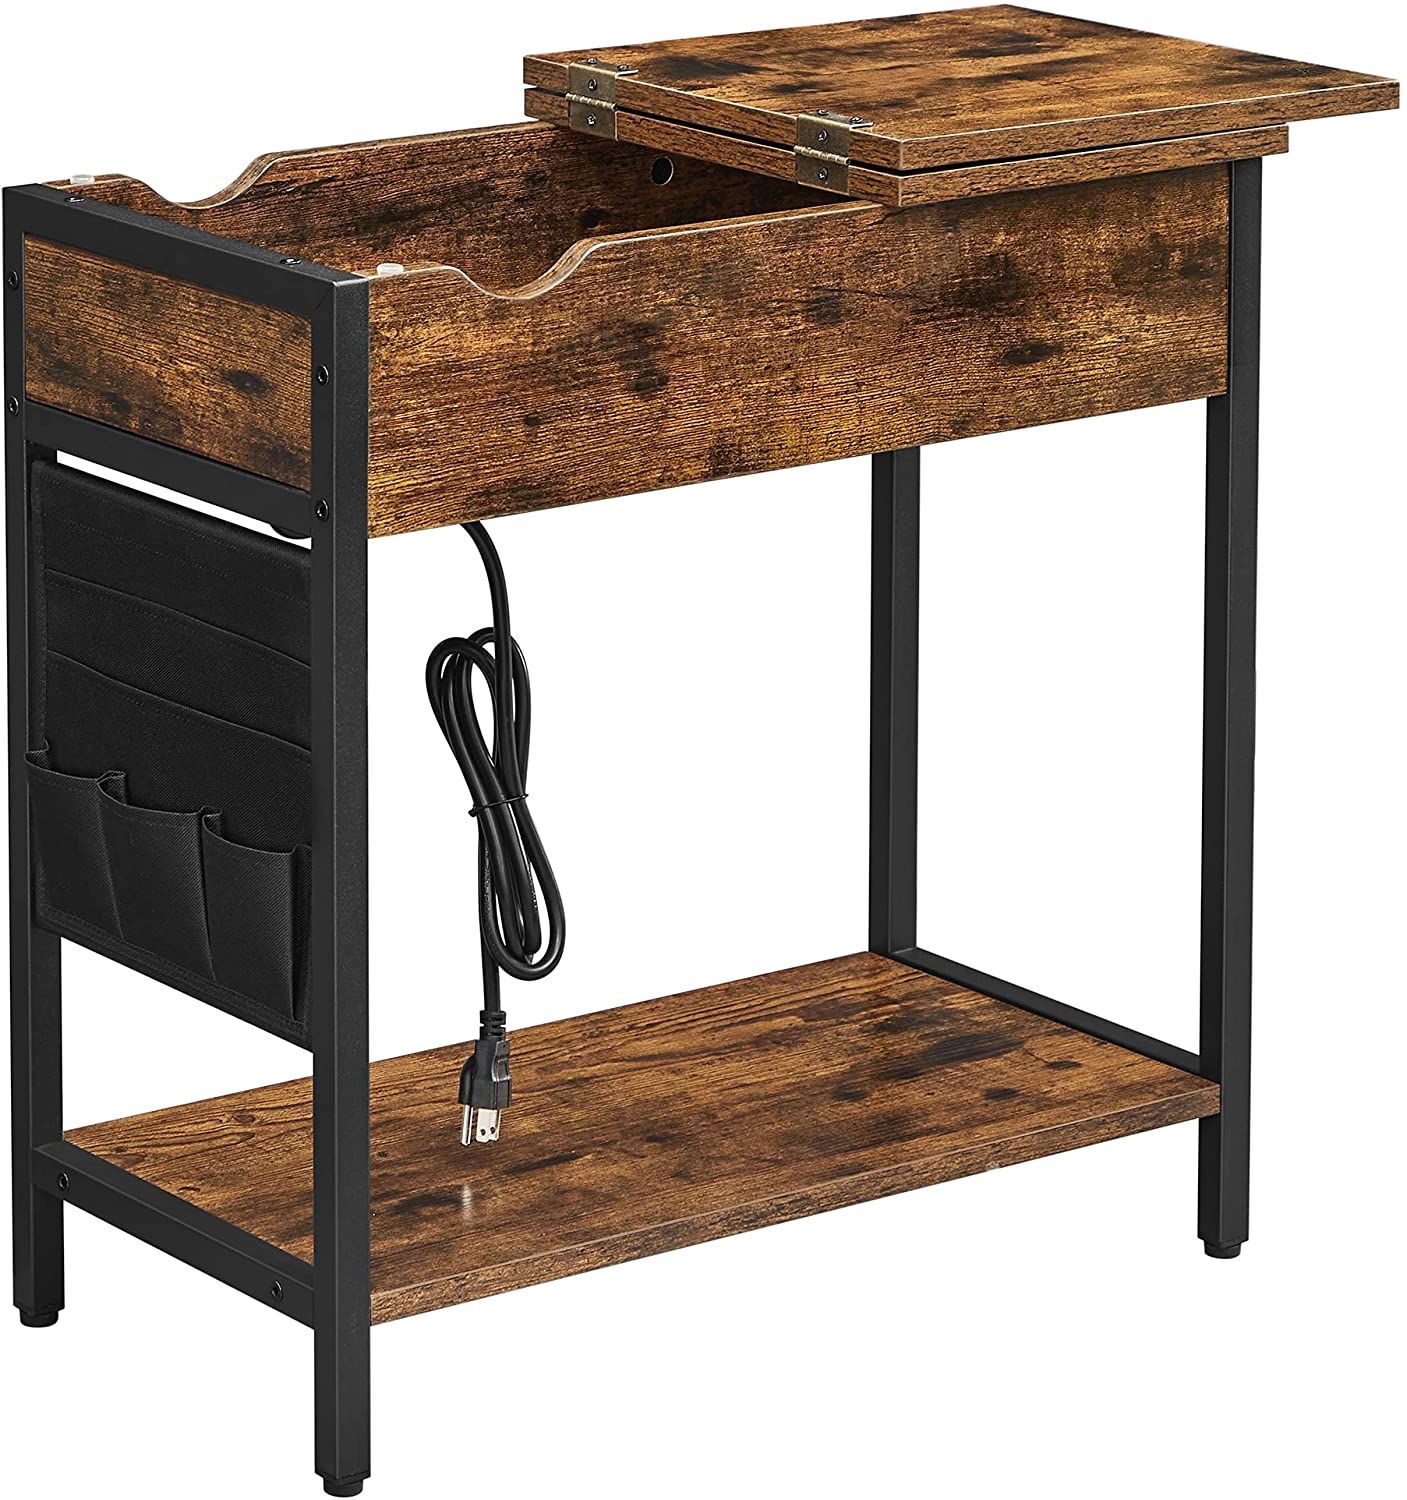 Side Table Storage Shelf and Fabric Bag, for Living Room, Bedroom, Rustic Brown and Black